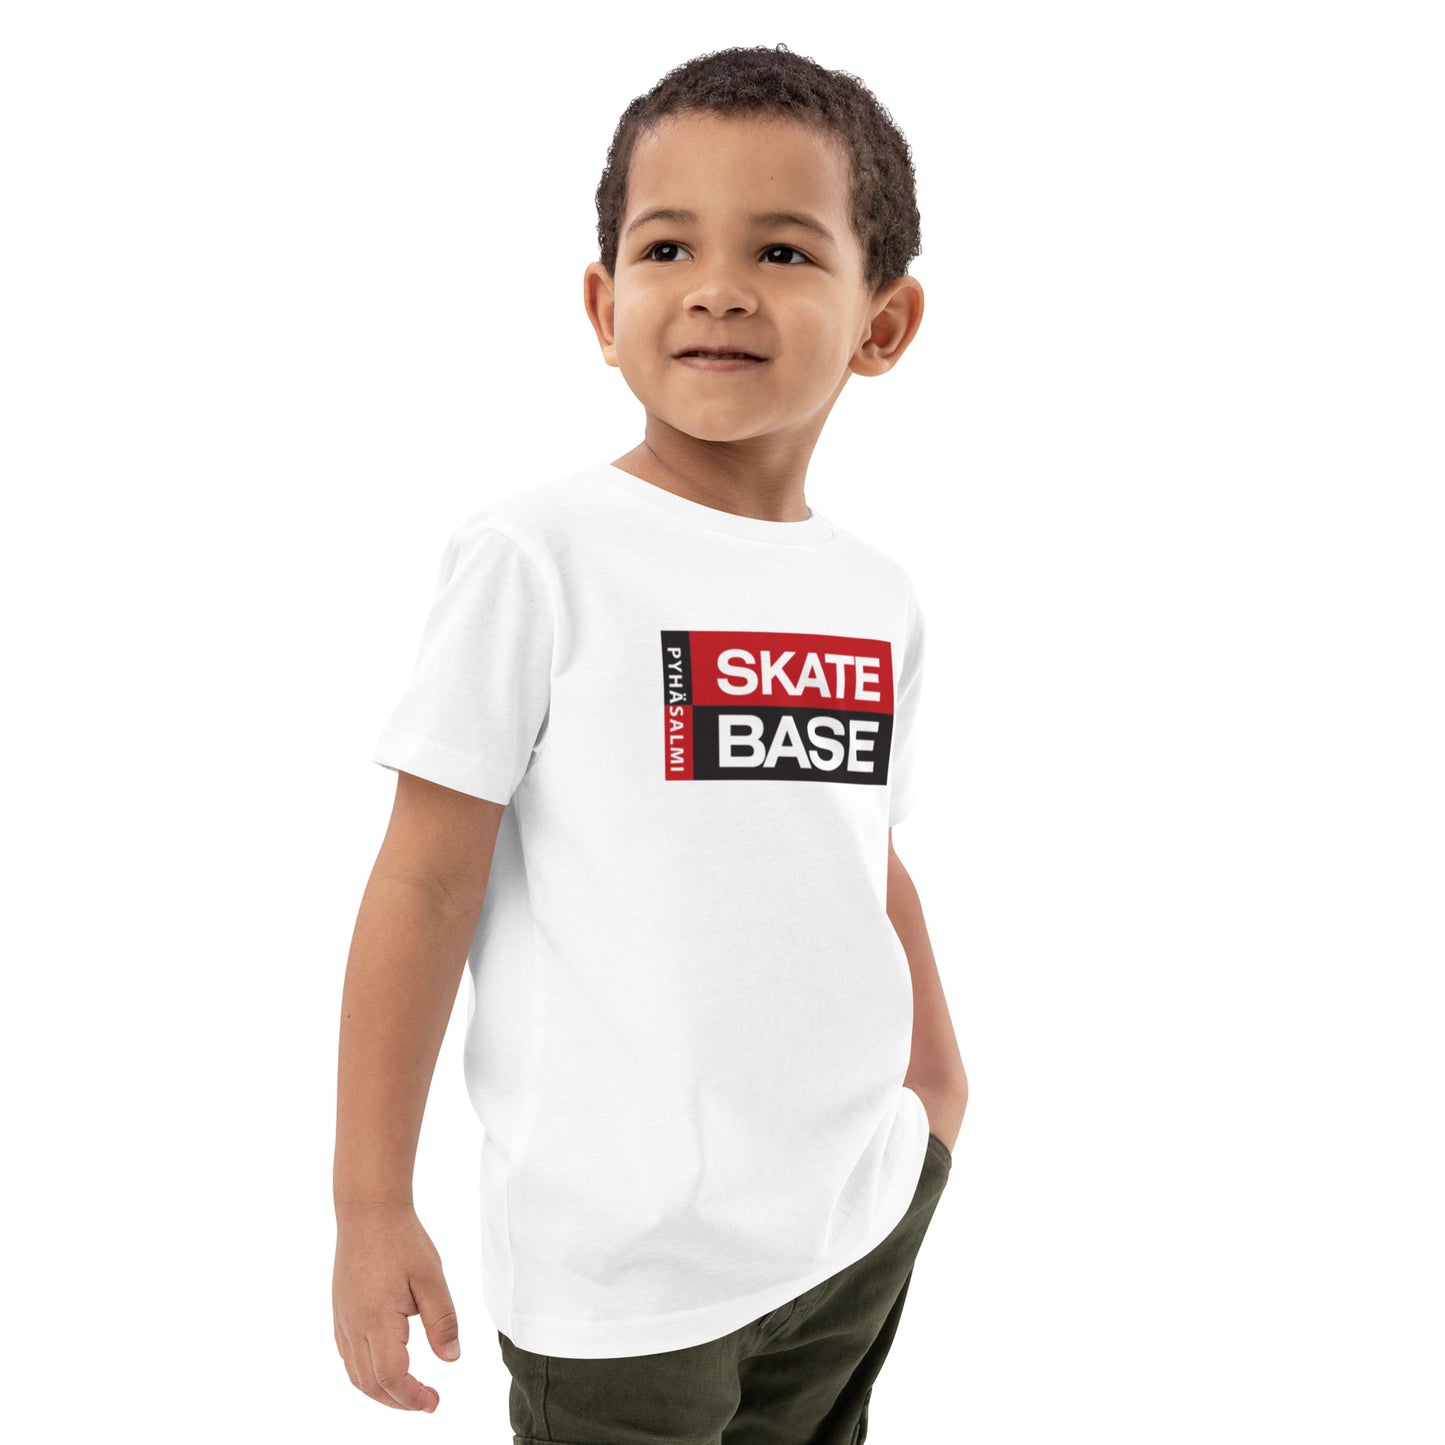 "Skate Base" t-shirt for children and teenagers